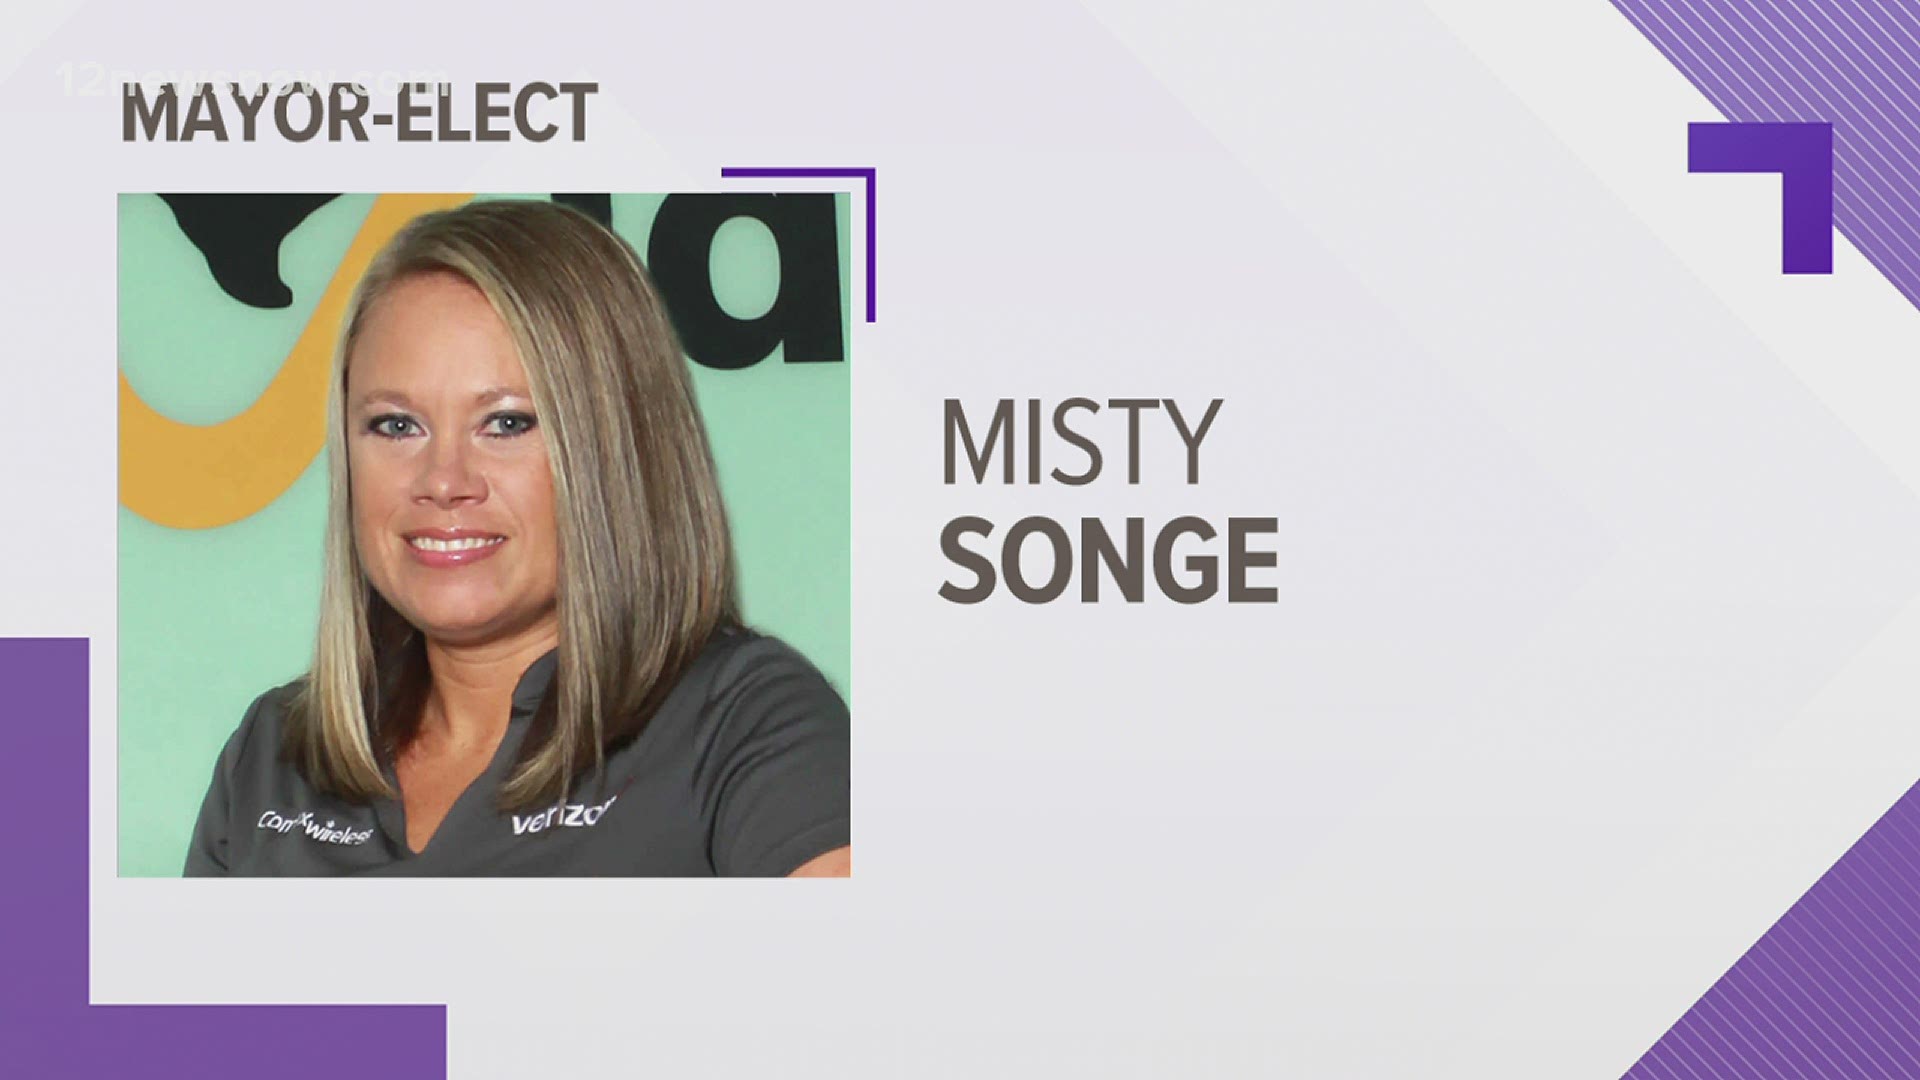 Misty Songe won the Vidor mayoral runoff race June 12, after garnering 65 percent of the votes.